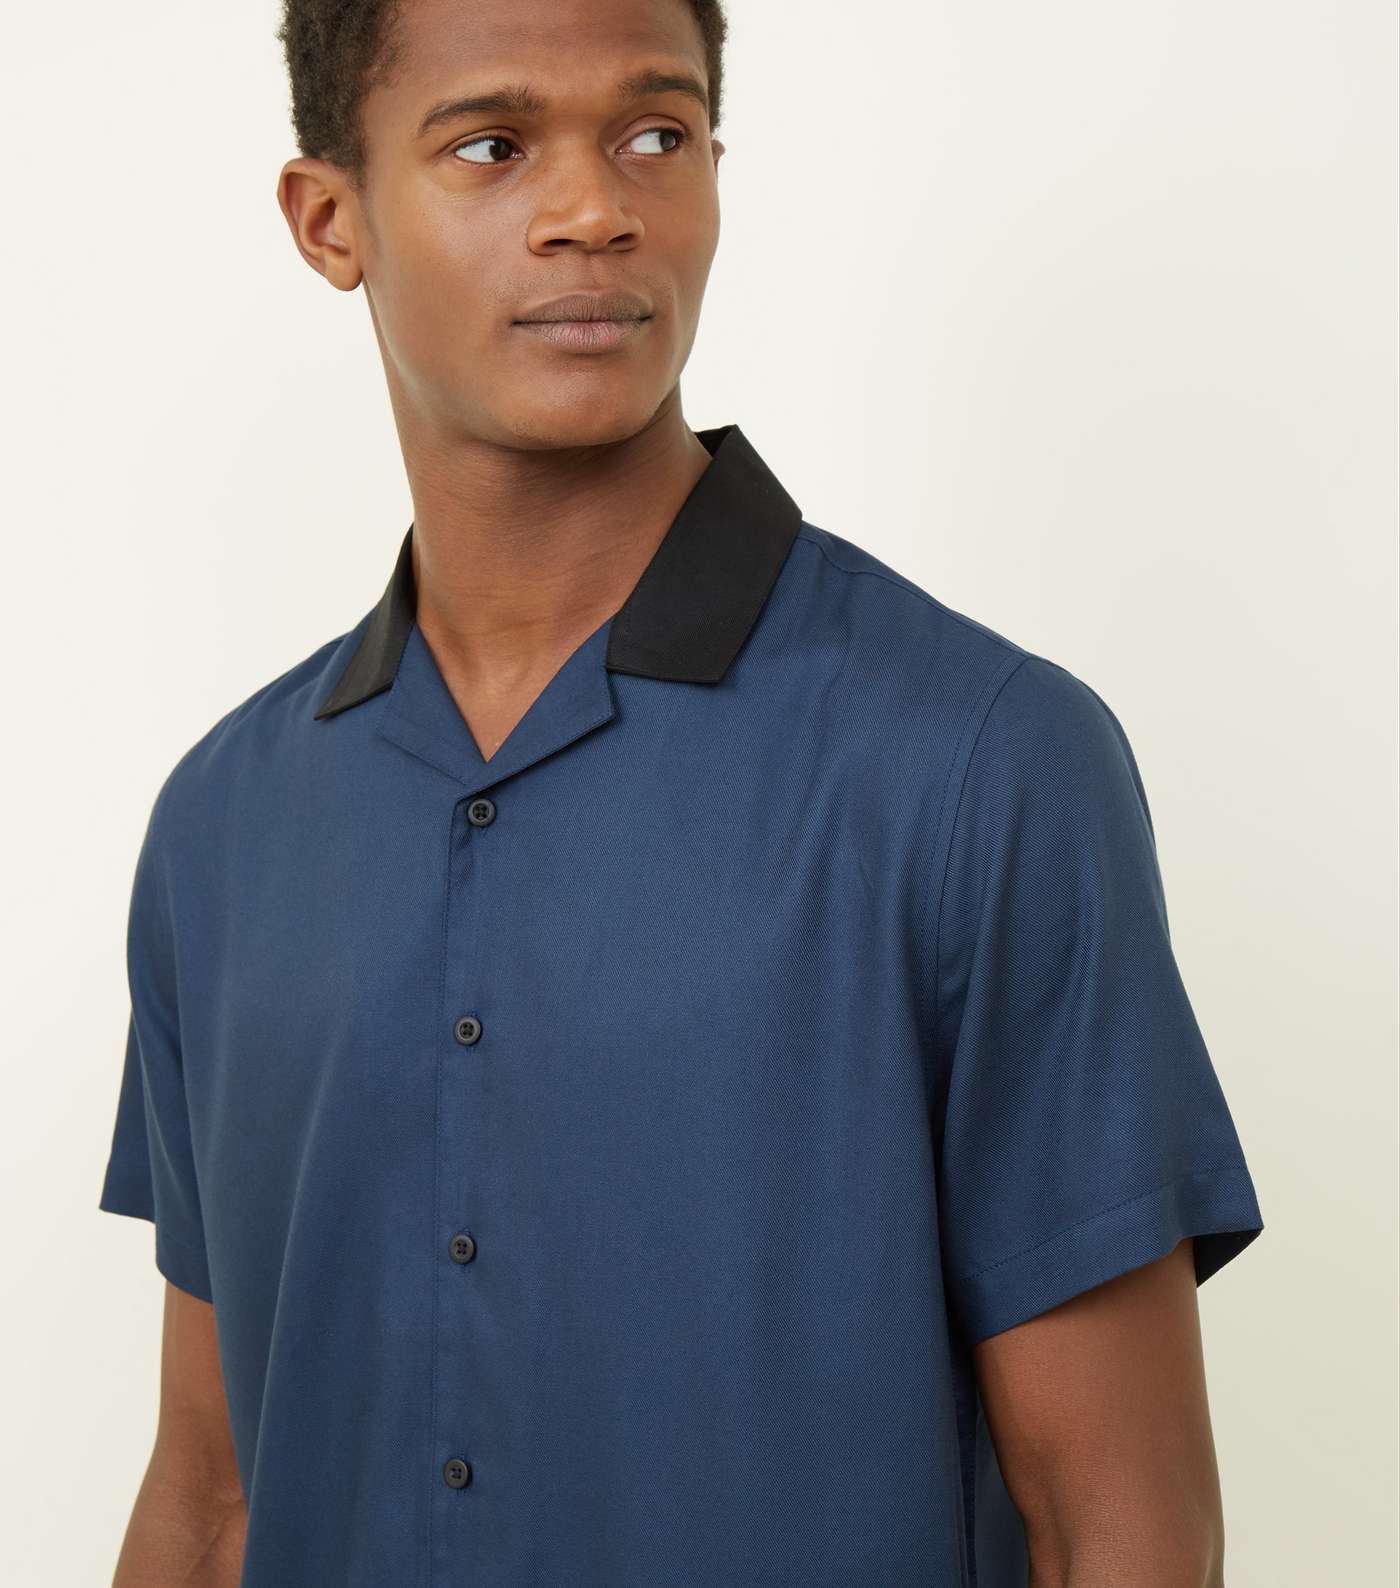 Bright Blue Contrast Collared Shirt Image 5